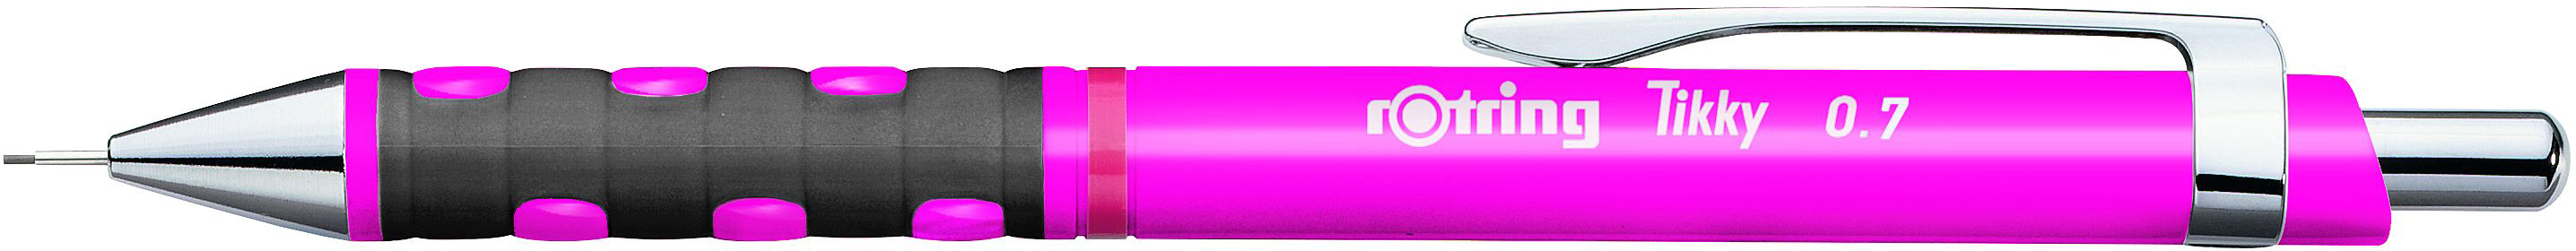 ROTRING Portemines TIKKY 0.7mm 2007218 neon pink